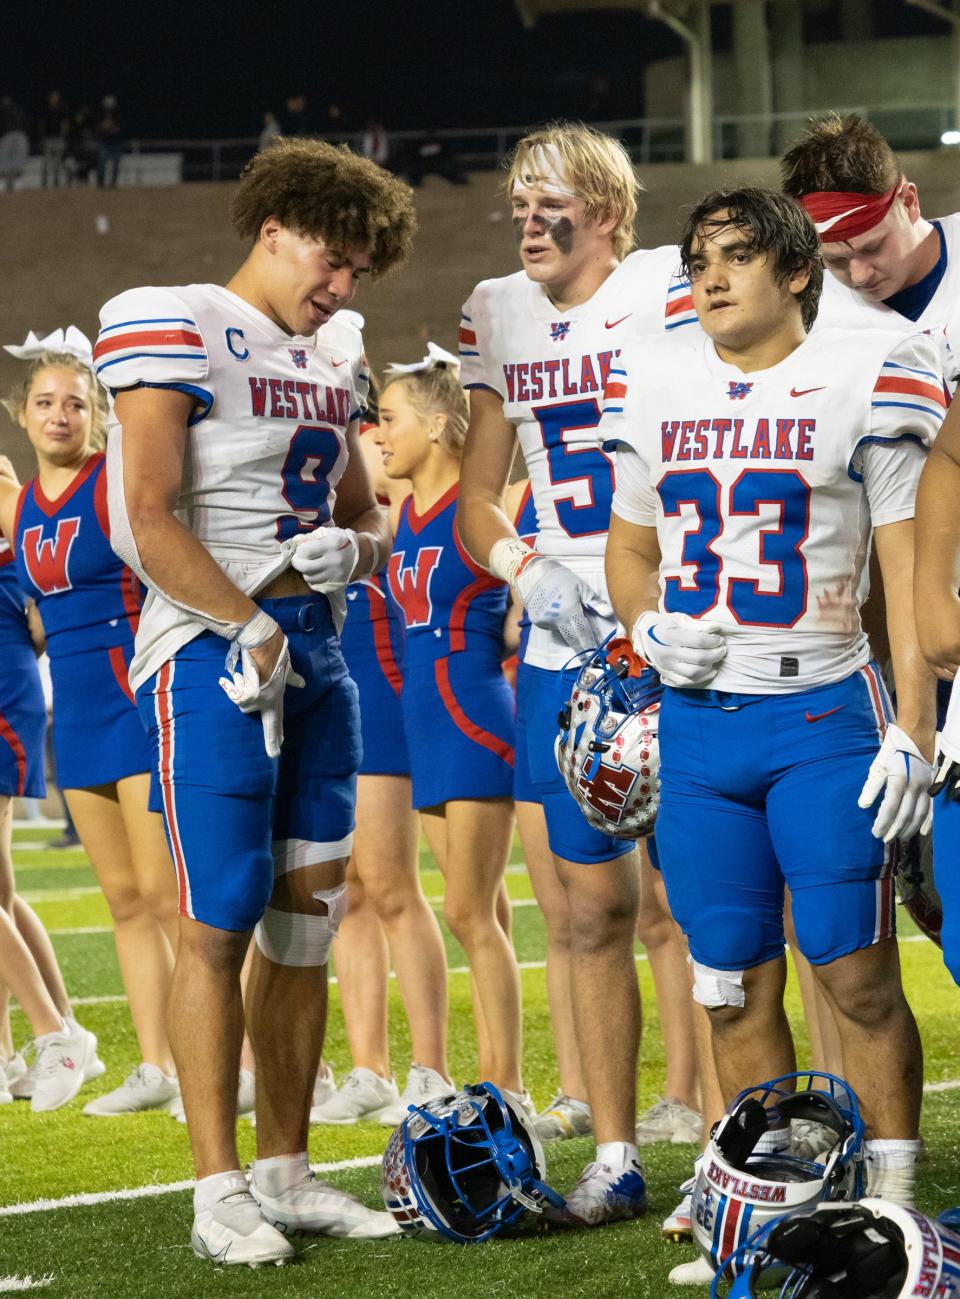 From left, Westlake's Jaden Greathouse, Keaton Kubecka and Jack Kayser absorb the loss to North Shore in the state semifinals.